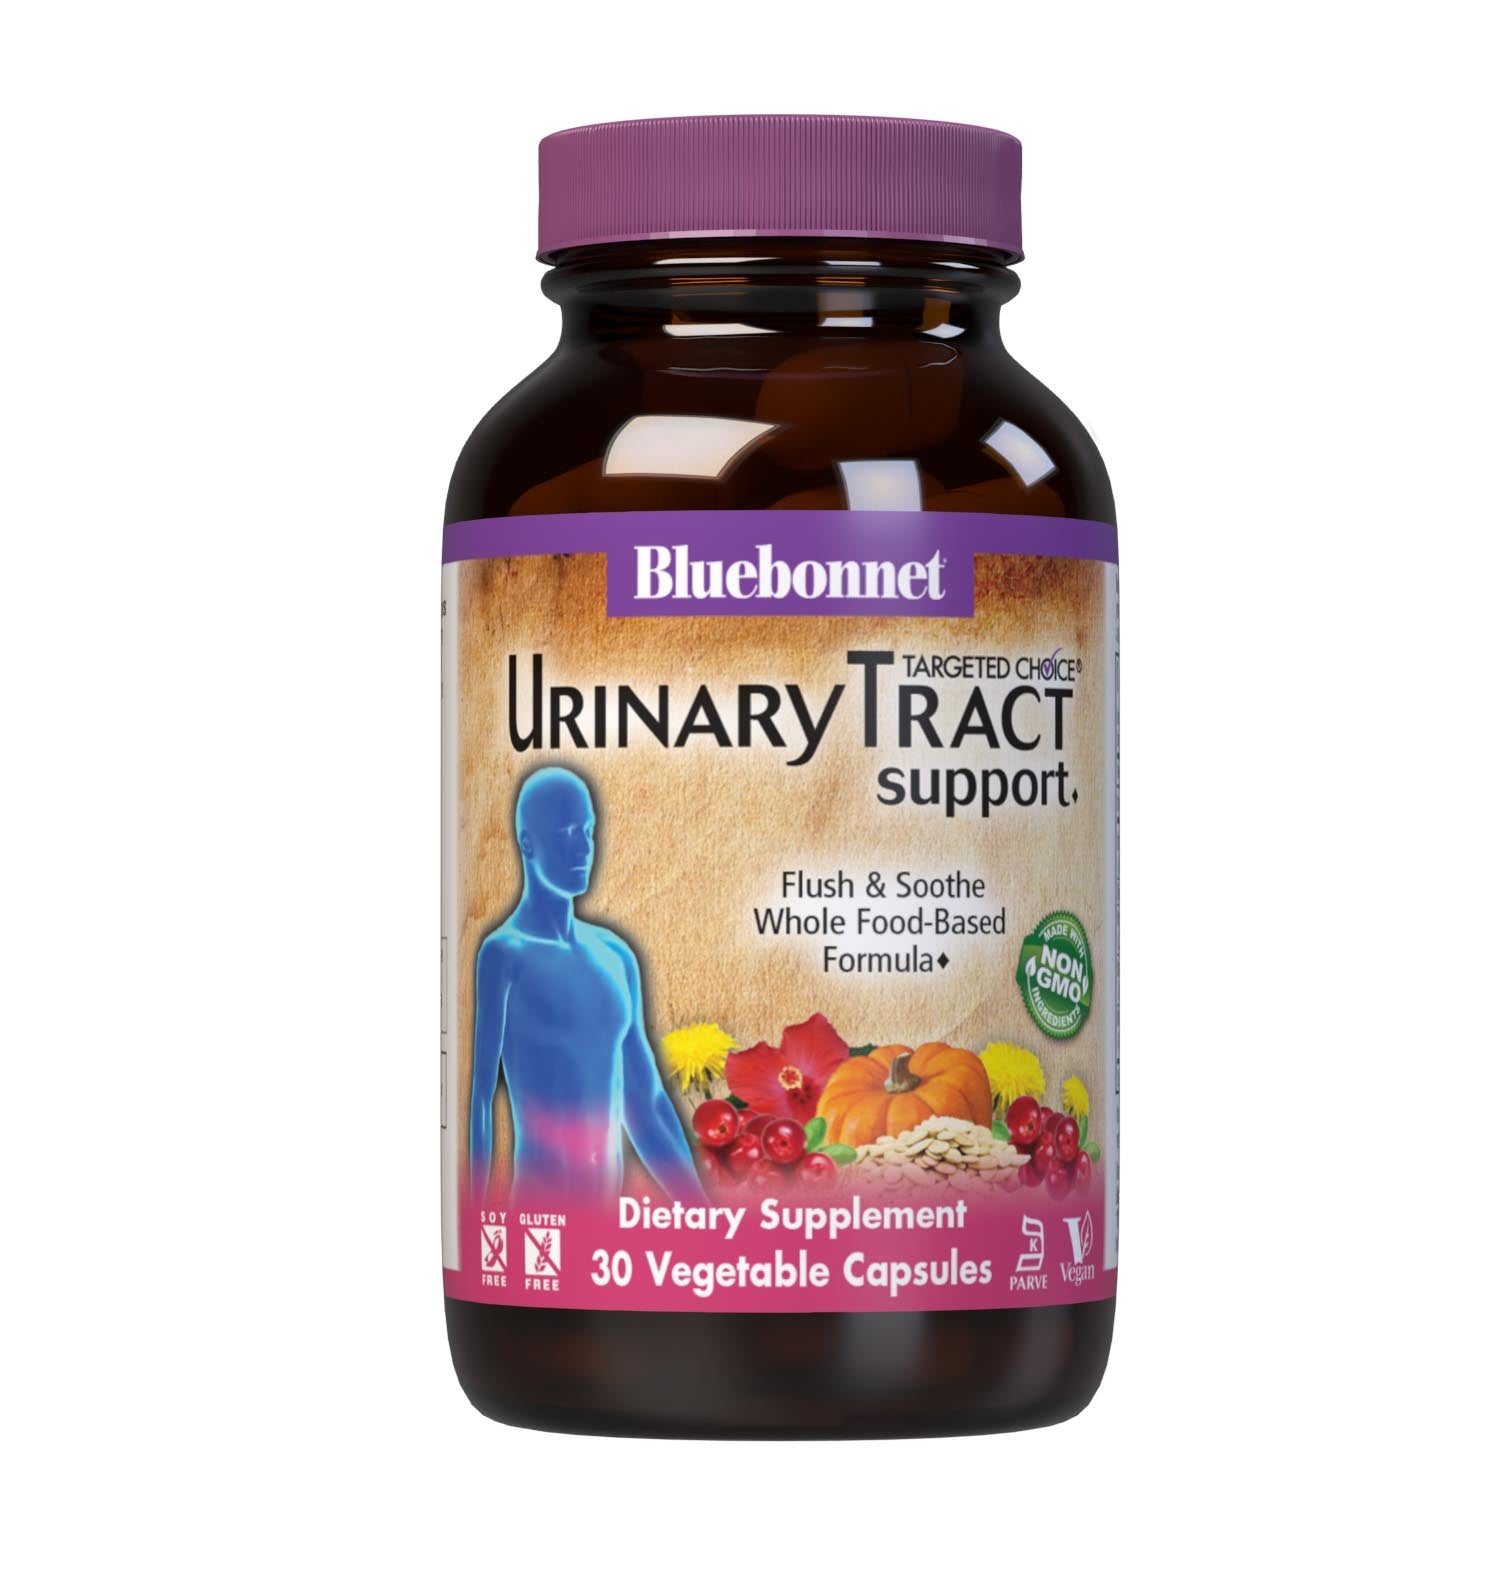 Bluebonnet’s Targeted Choice Urinary Tract Support Capsules are specially formulated with a blend of D-mannose, cranberry fruit extract and identity-preserved (IP) vitamin C along with complementary, sustainably harvested or wildcrafted herbs and botanicals. This soothing maintenance formula helps support a healthy urinary tract by flushing waste from the system and providing a nourishing environment for healthy flora to thrive. #size_30 count